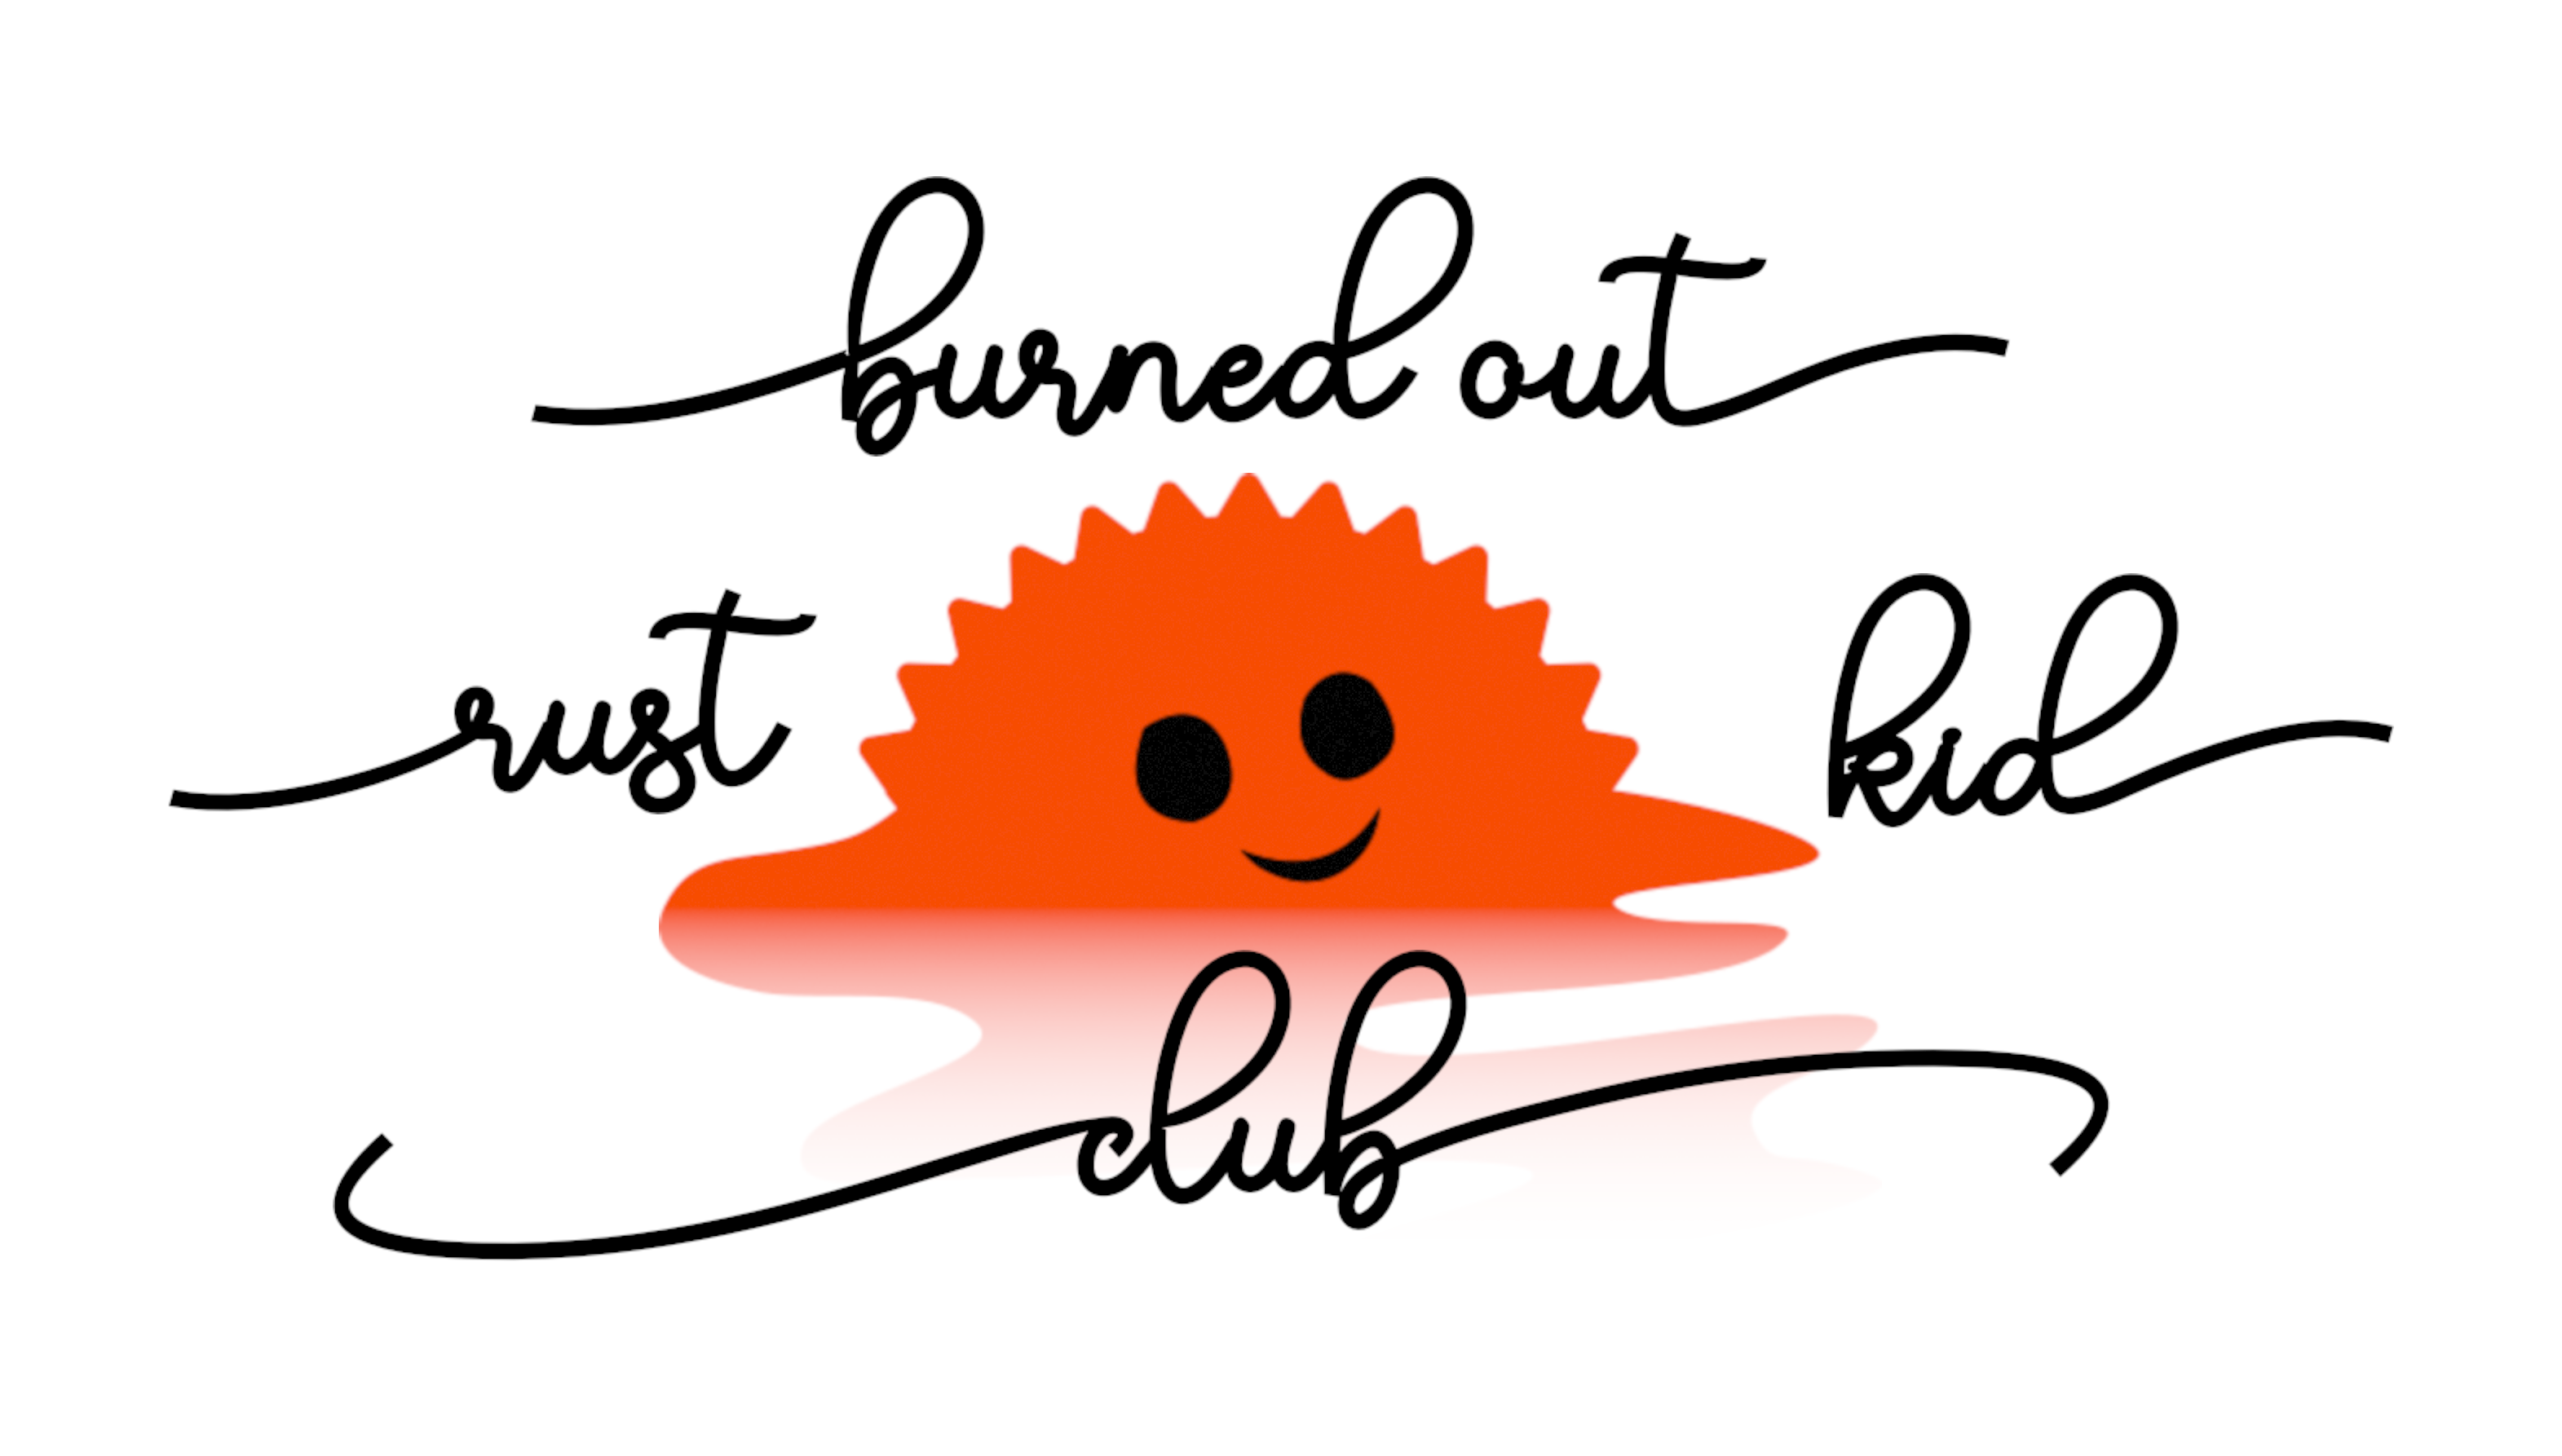 a melting, smiling, ferris. it's surrounded by the cursive text "burned out rust kid club".